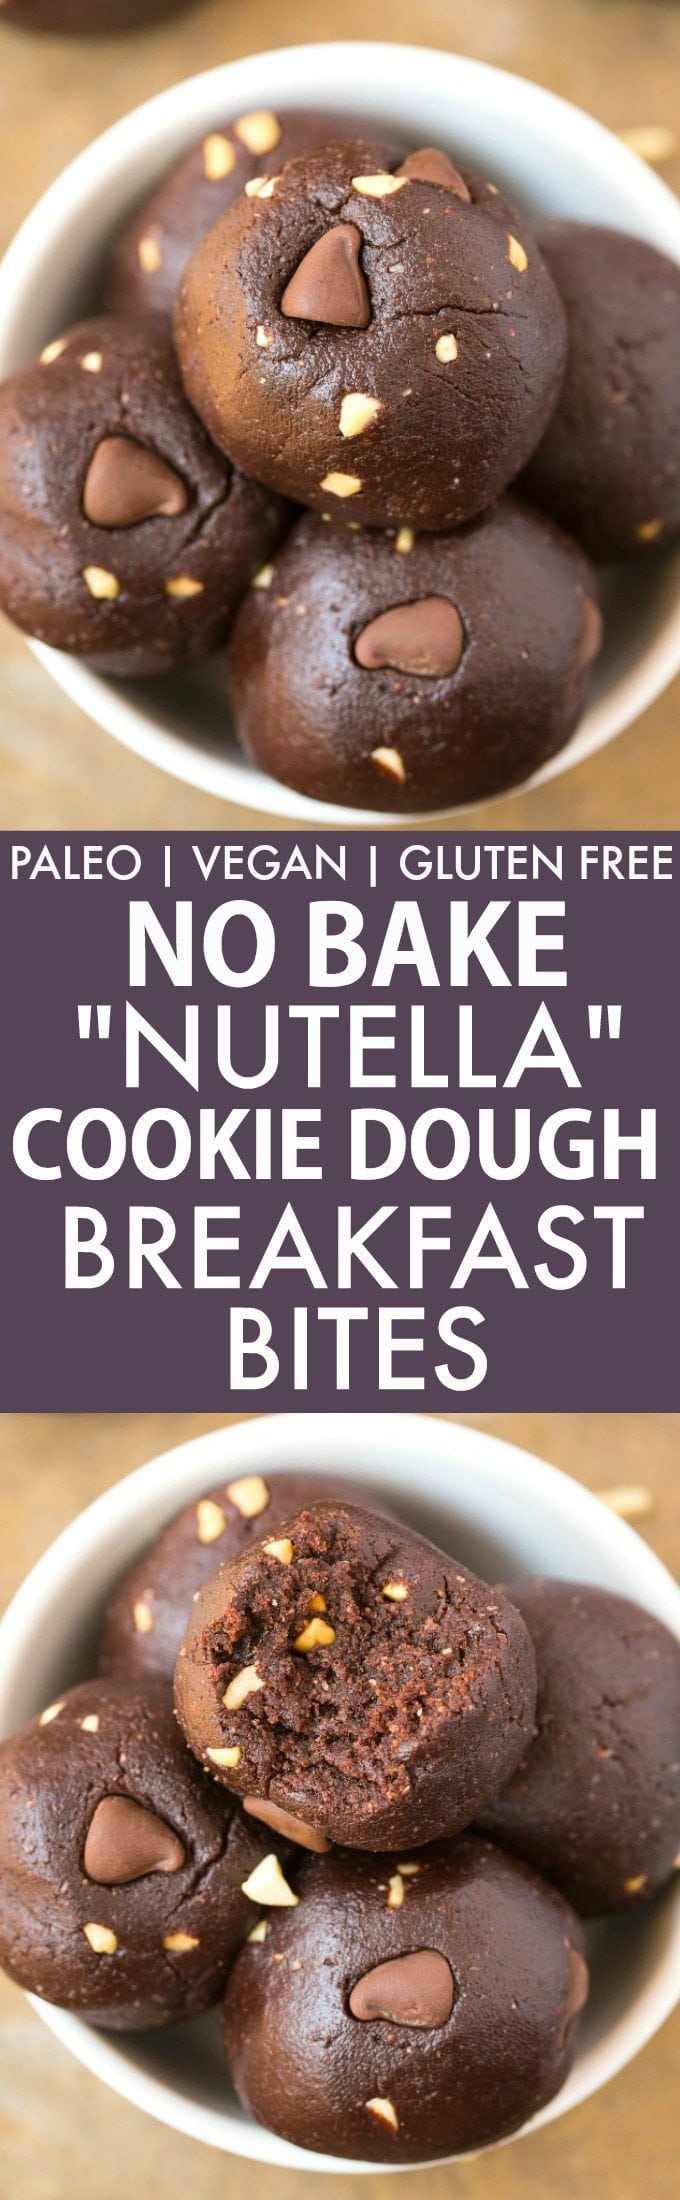 Healthy No Bake "Nutella" Cookie Dough BREAKFAST Bites (GF, V, Paleo)- Quick, easy and delicious no bake bites which take minutes to whip up and like having a guilt-free, protein packed dessert for breakfast! Dairy free and refined sugar free! {vegan, gluten free, paleo recipe}- thebigmansworld.com